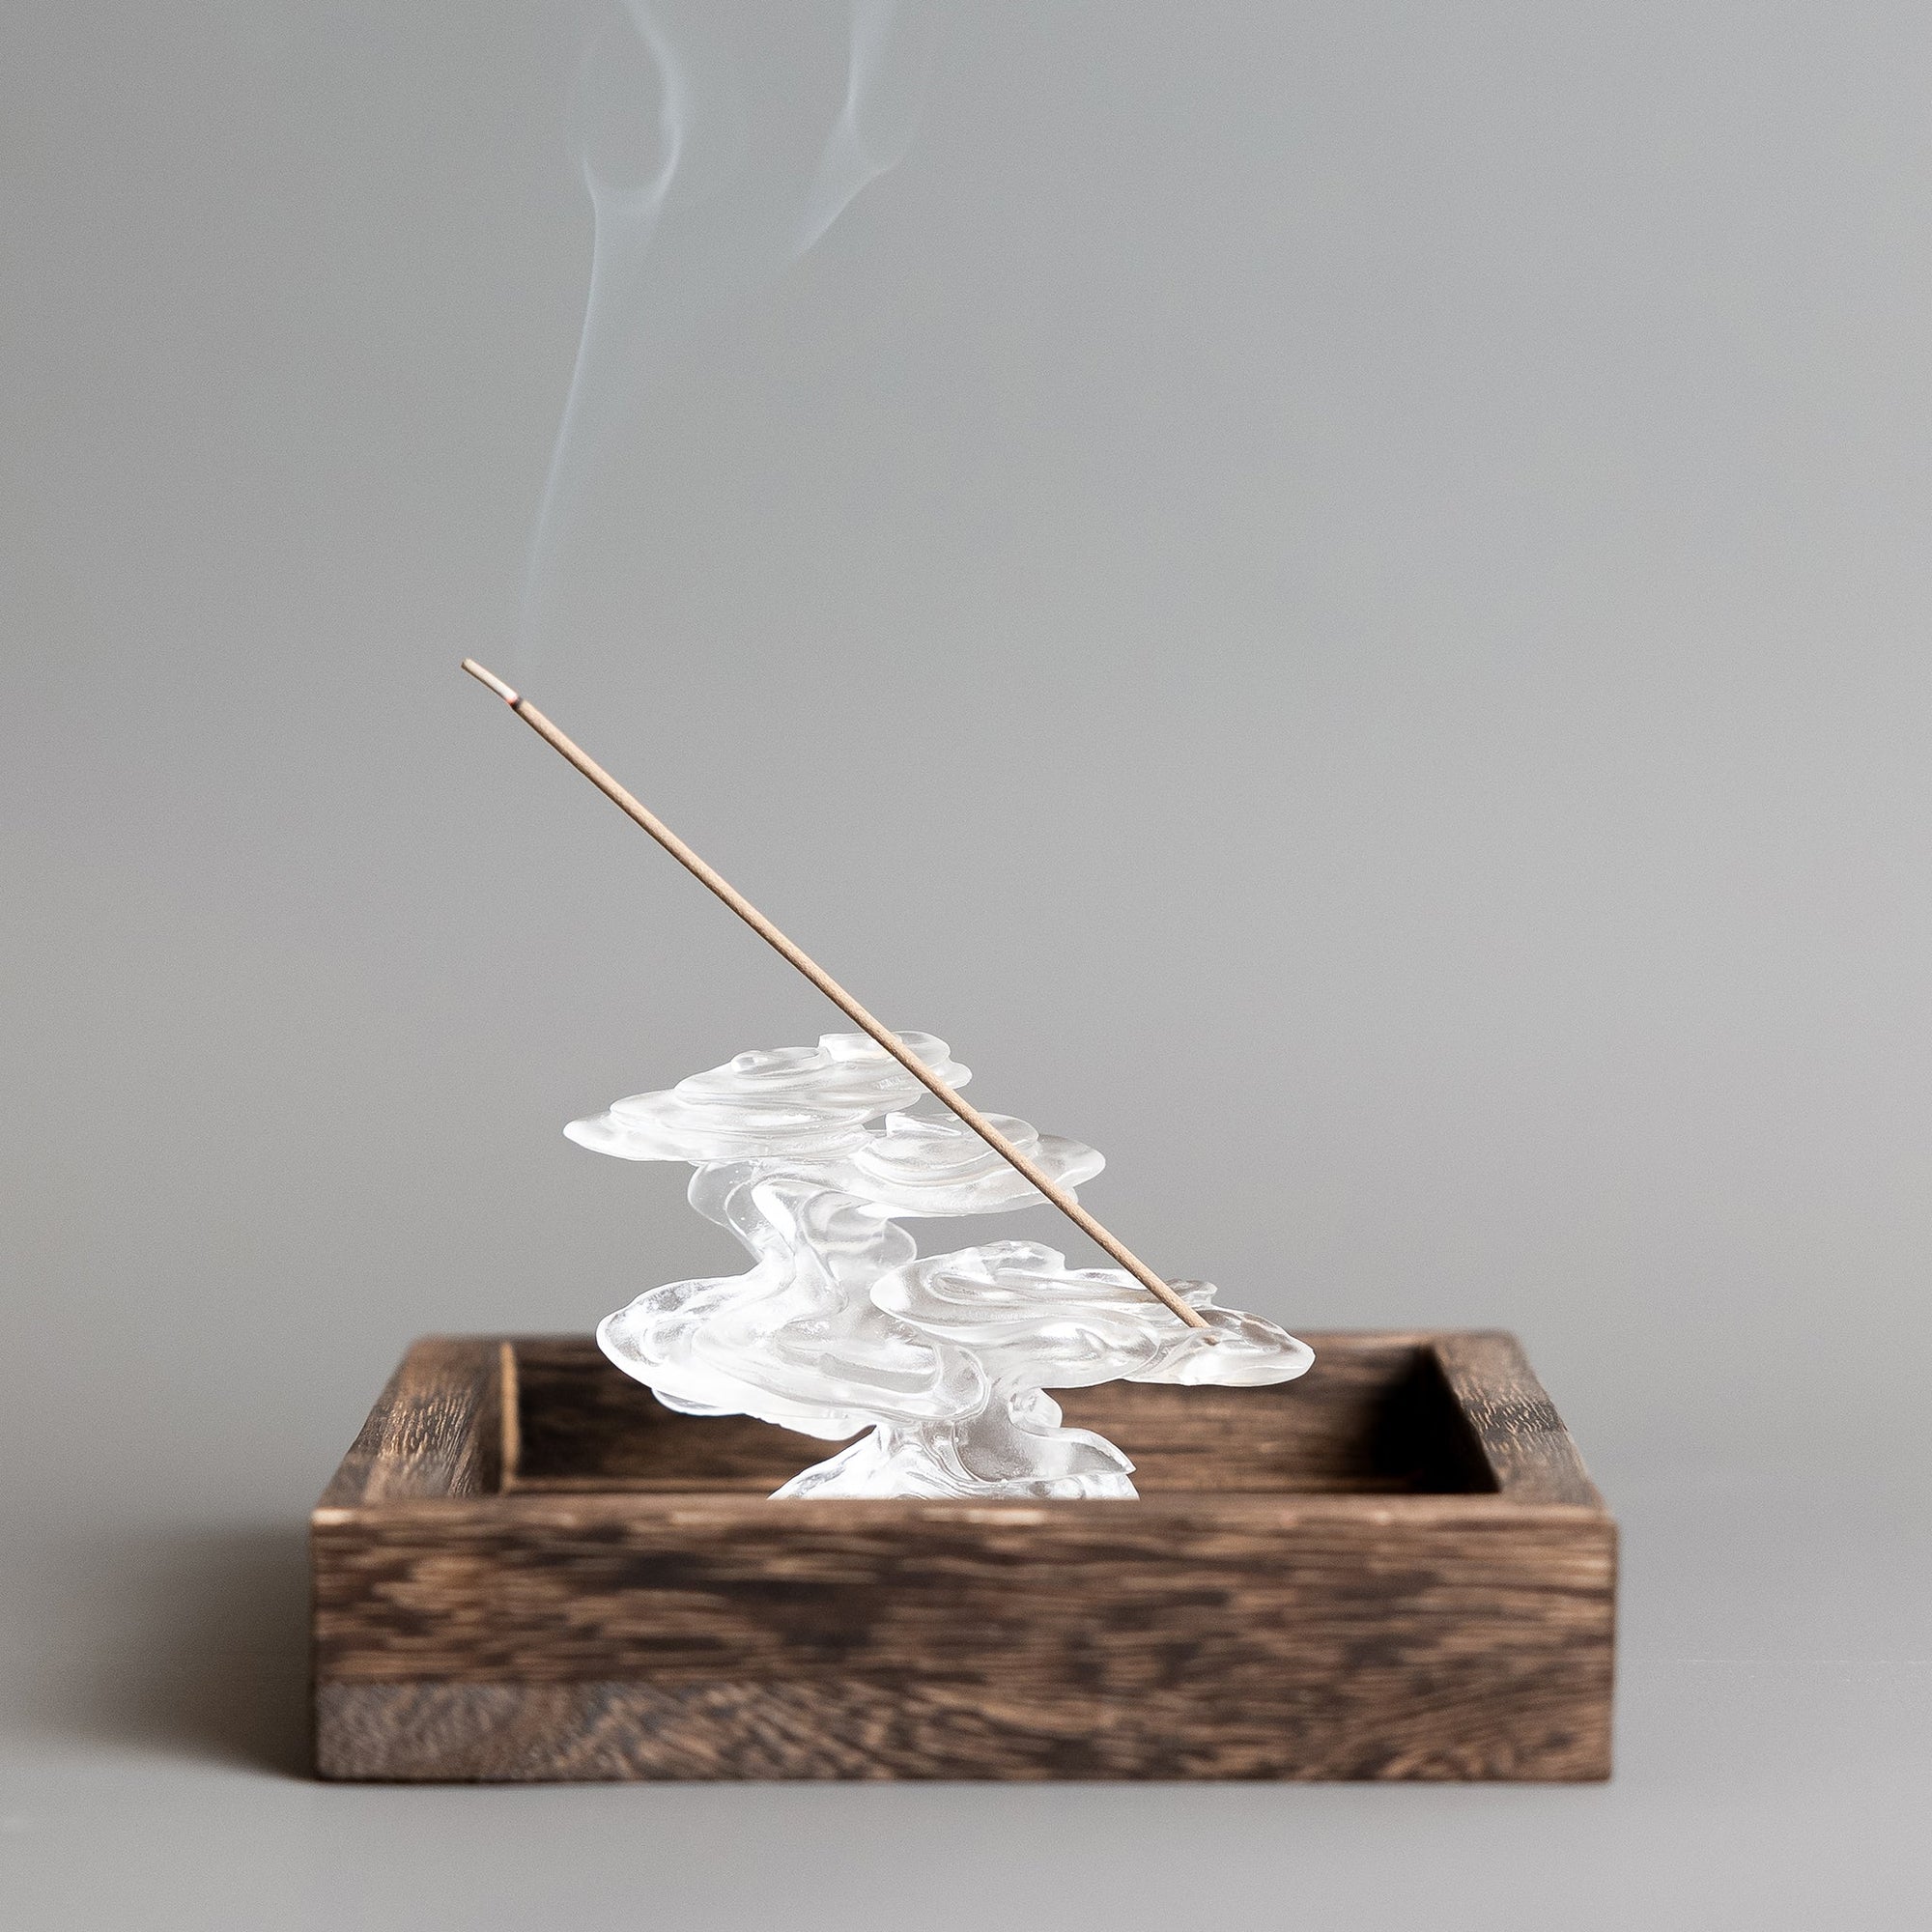 A burning incense stick in a cloud-inspired liuli crystal incense holder